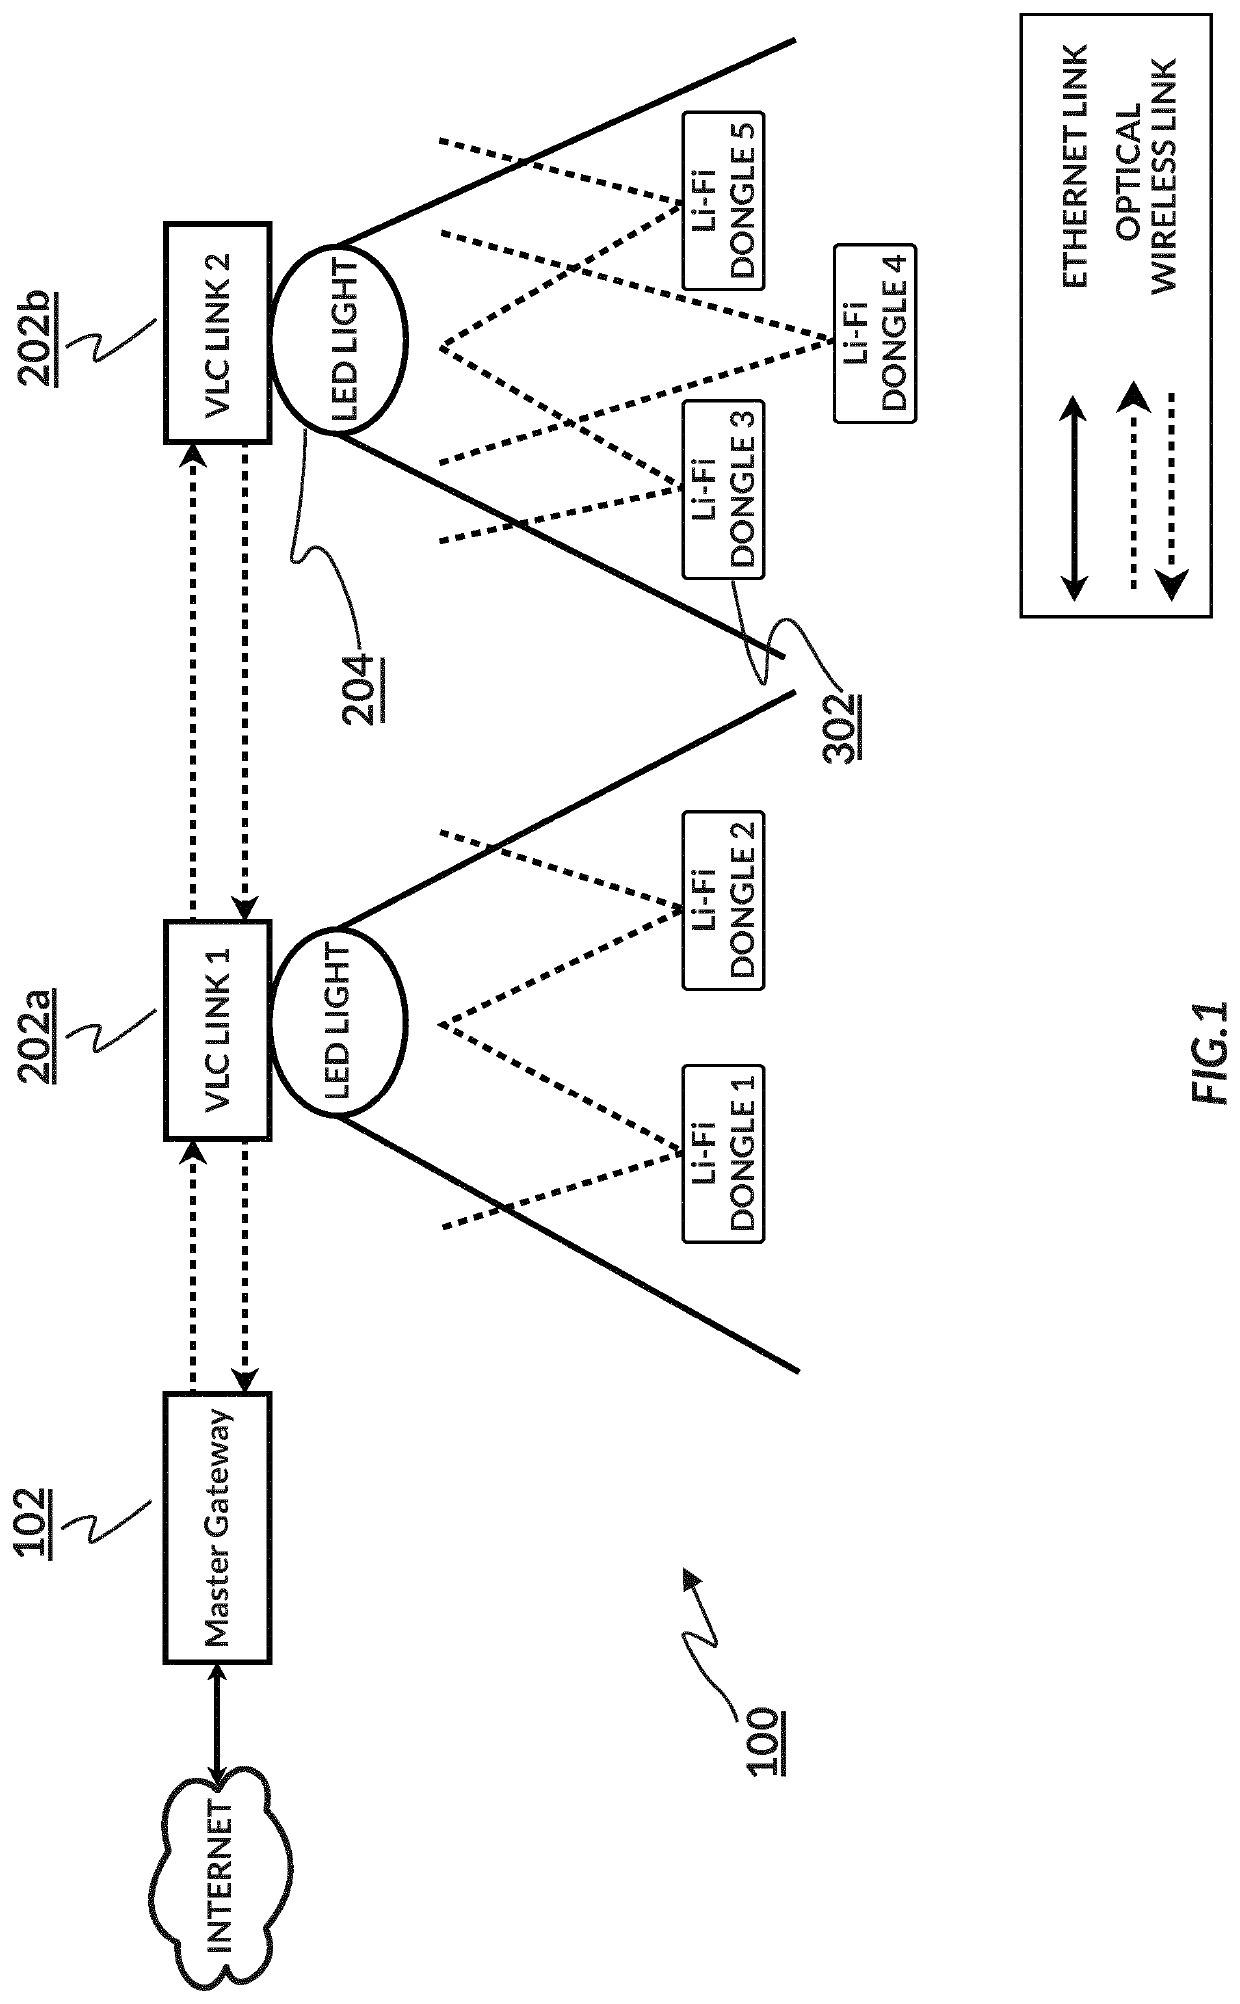 Optical wireless communication system and adaptive optical wireless communication network